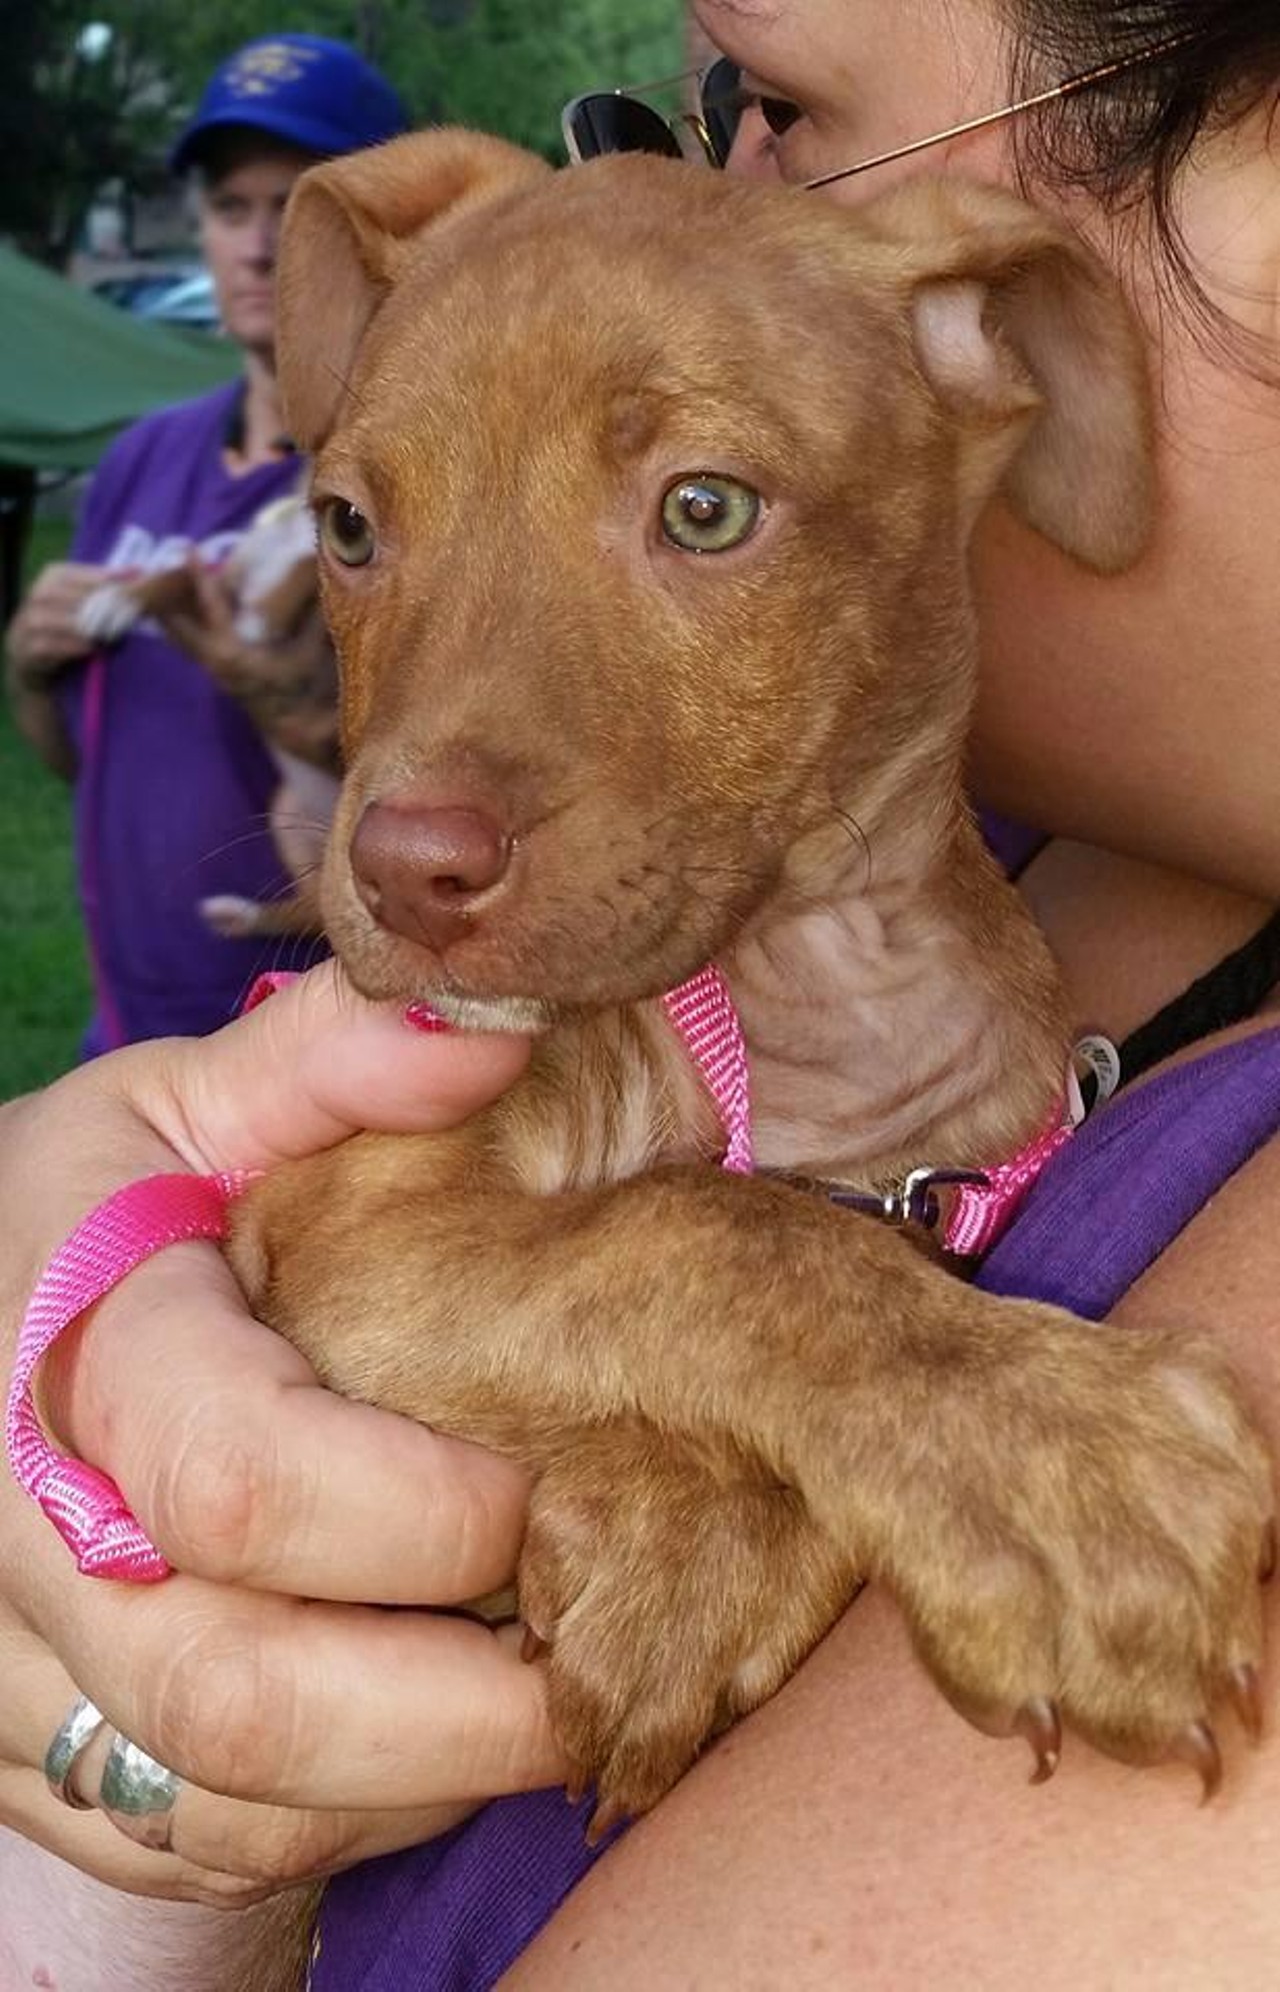  Shirley
Terrier Mix | Female | Puppy
Shirley looks fancy as hell and we want her.